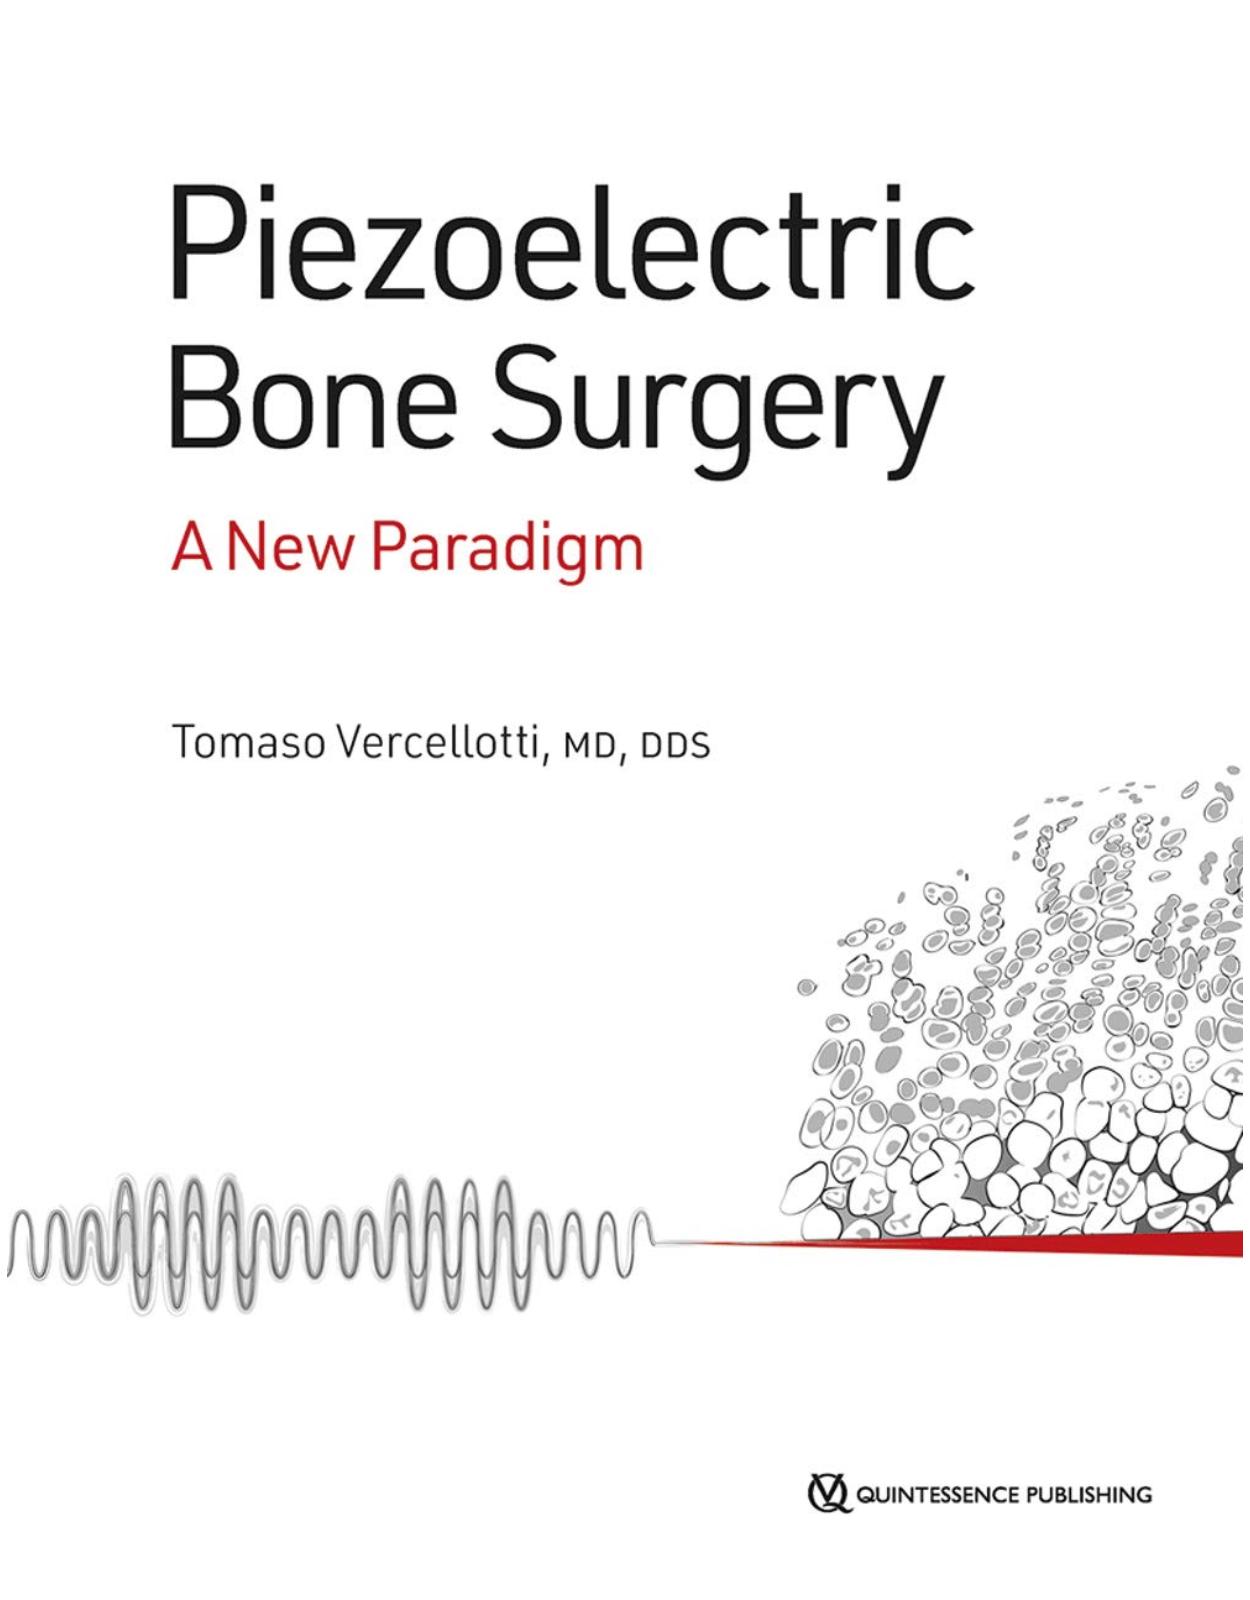 The Piezoelectric Bone Surgery: A New Paradigme